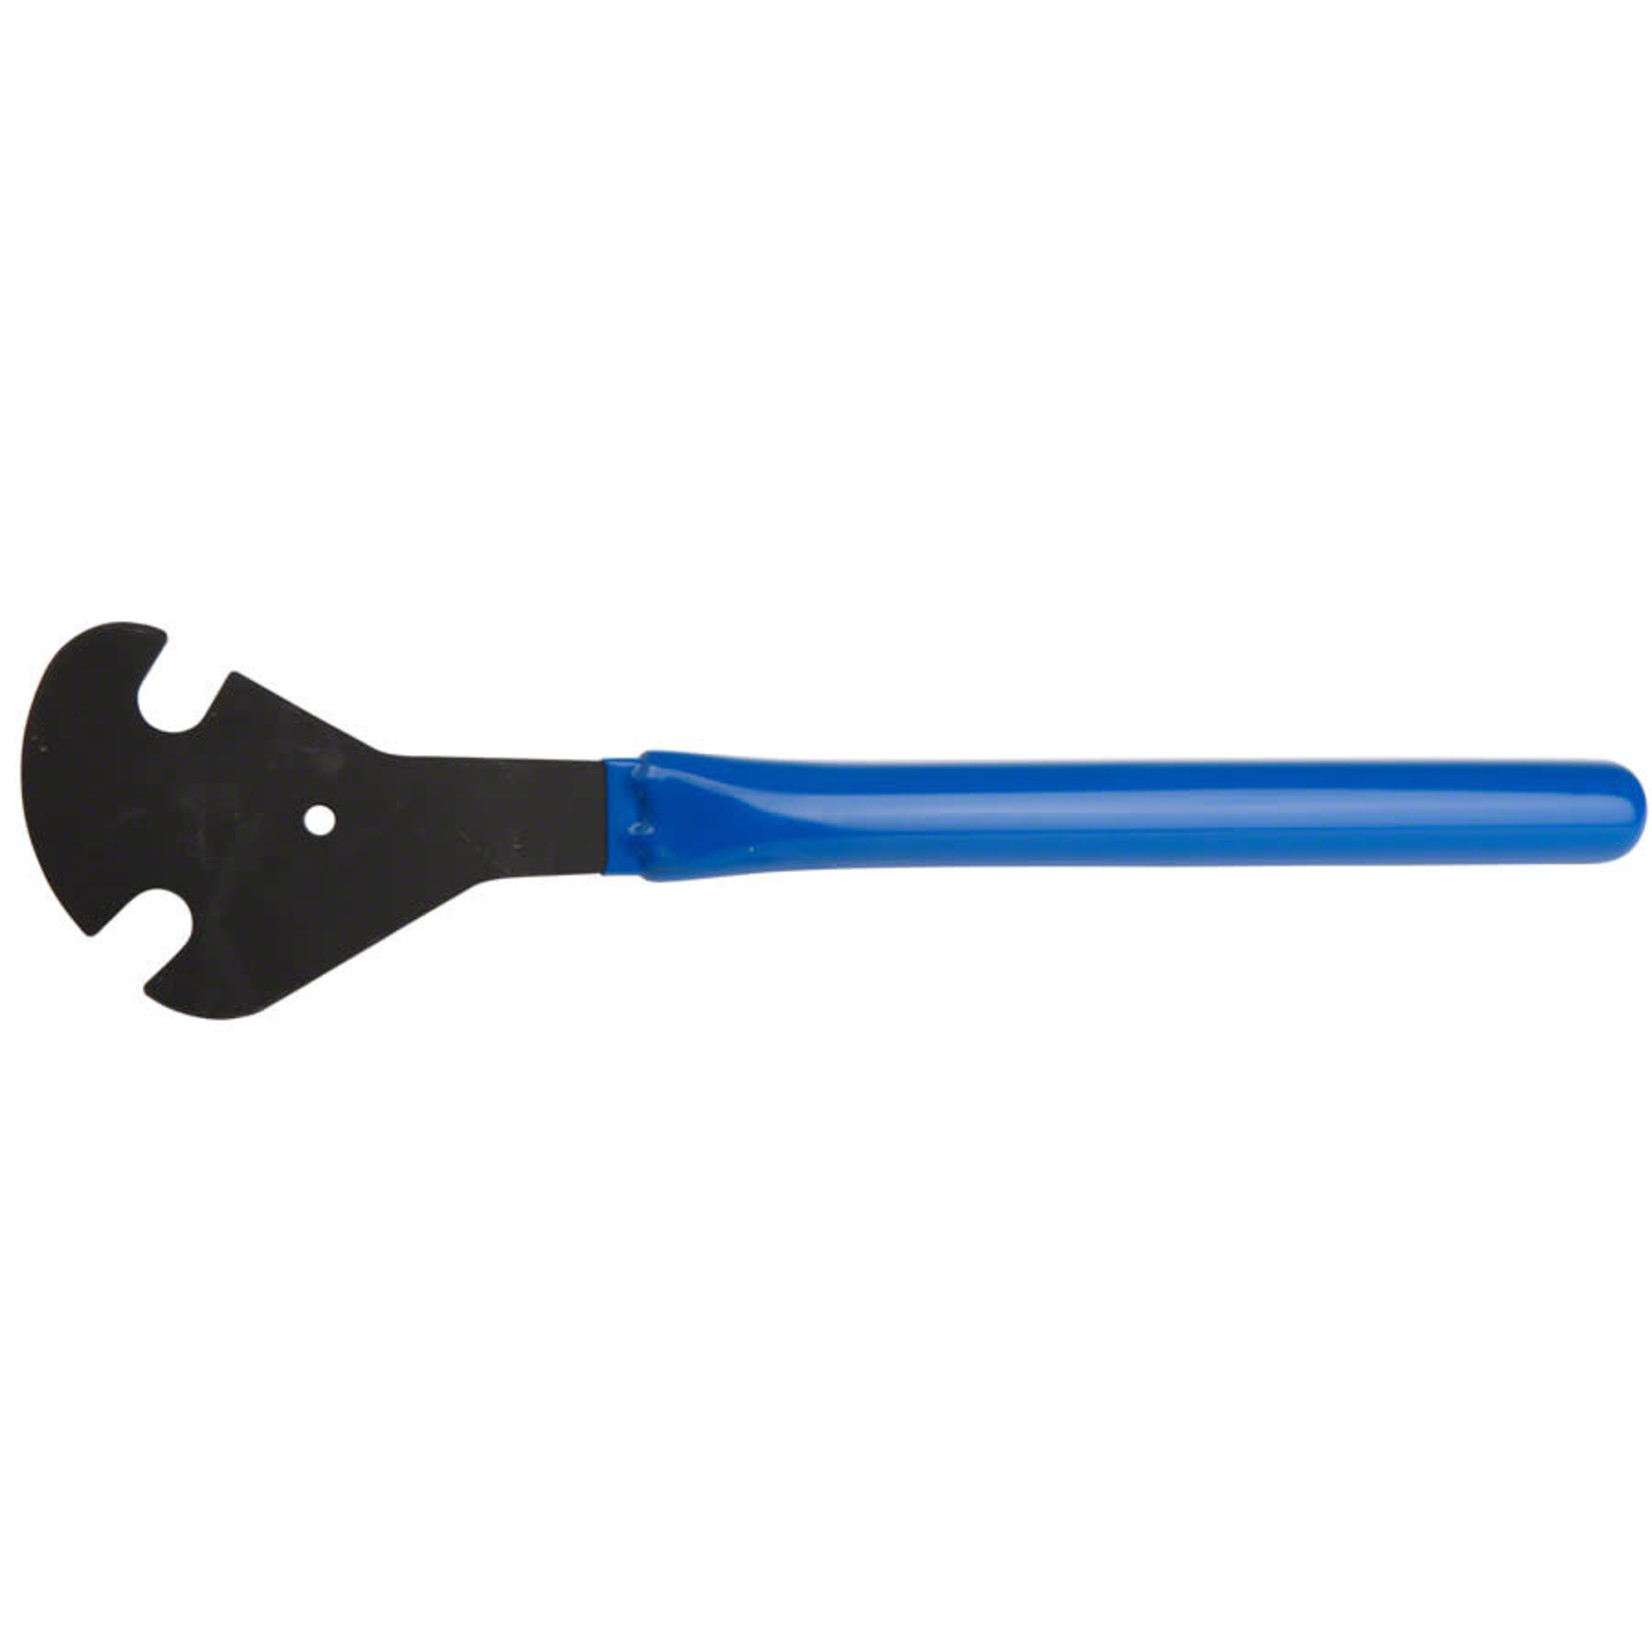 Park Tool Park Tool PW-4 Professional Shop 15.0mm Pedal Wrench